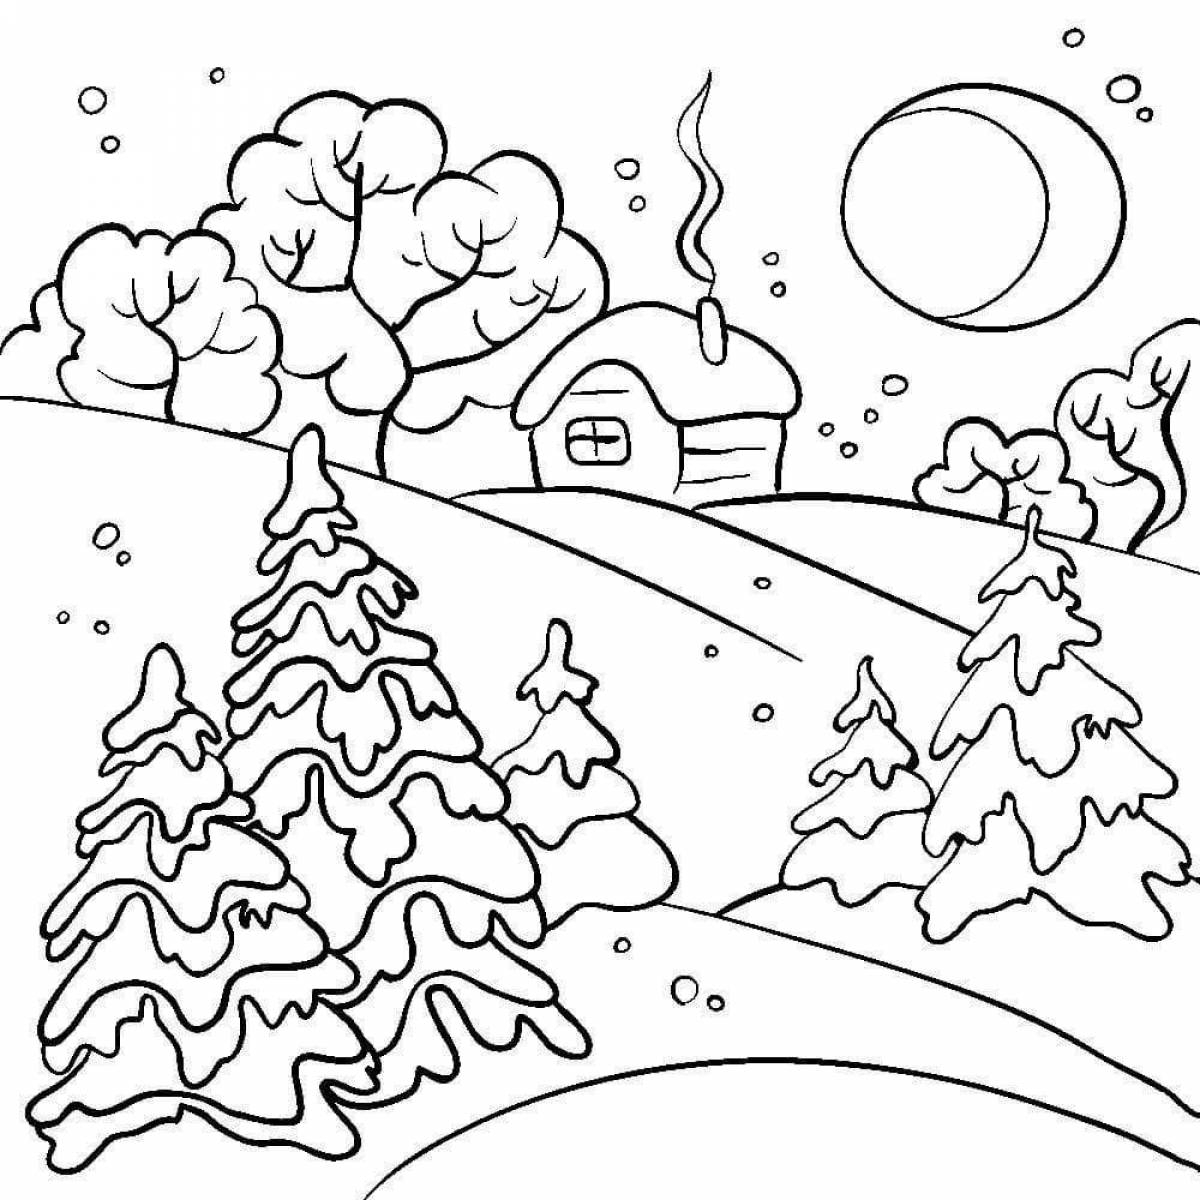 Colouring bright winter forest for children